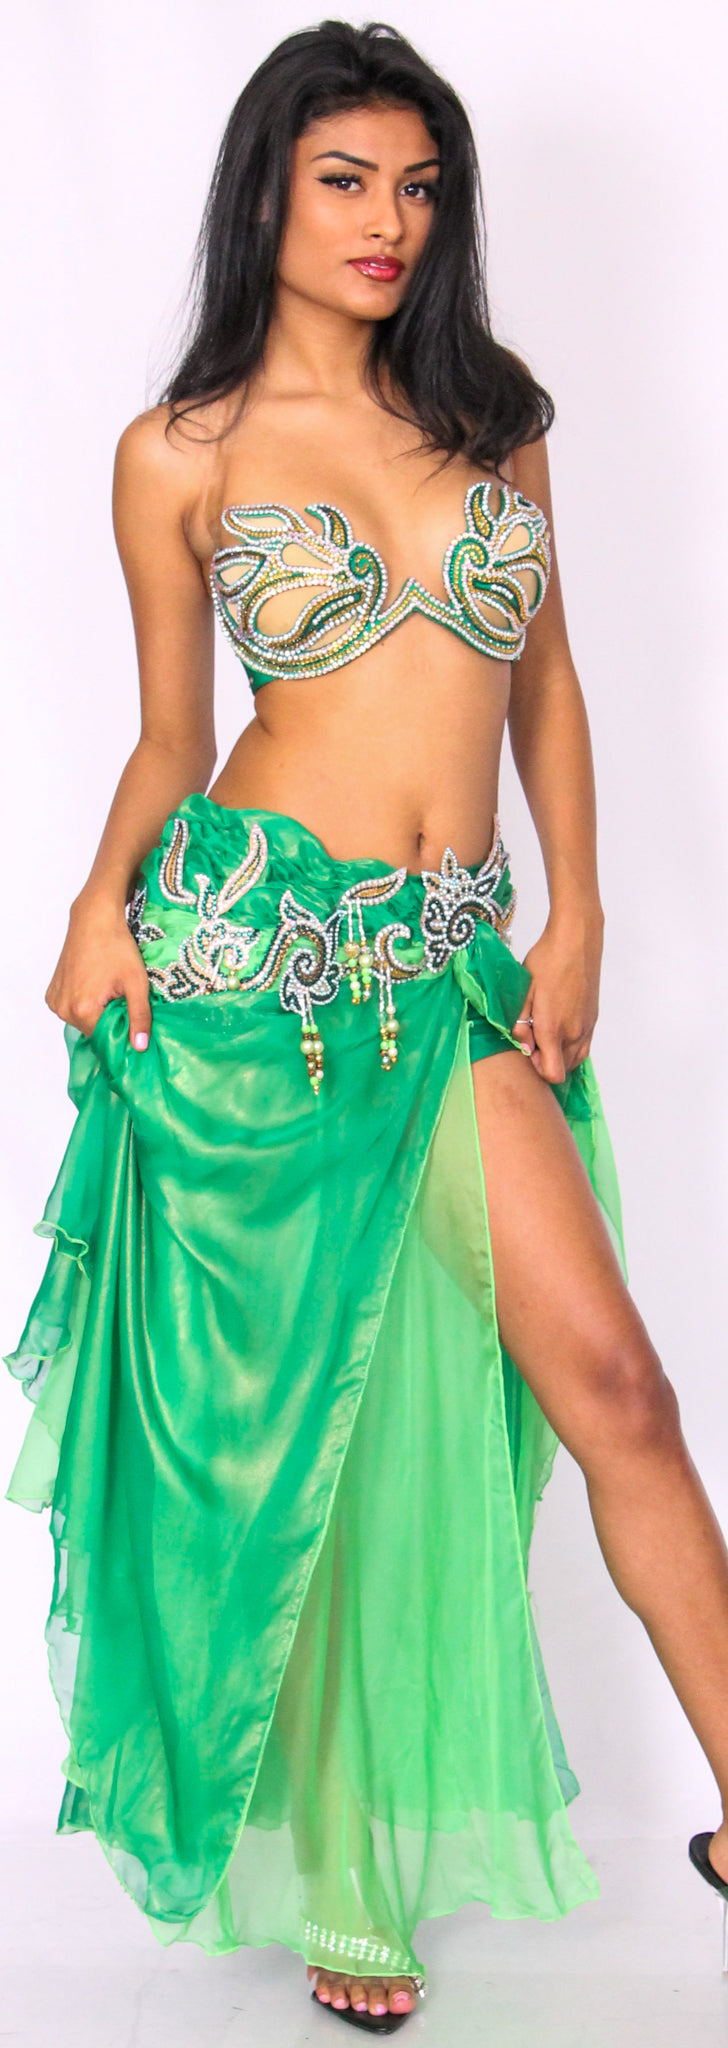 The Belly Dance Shop